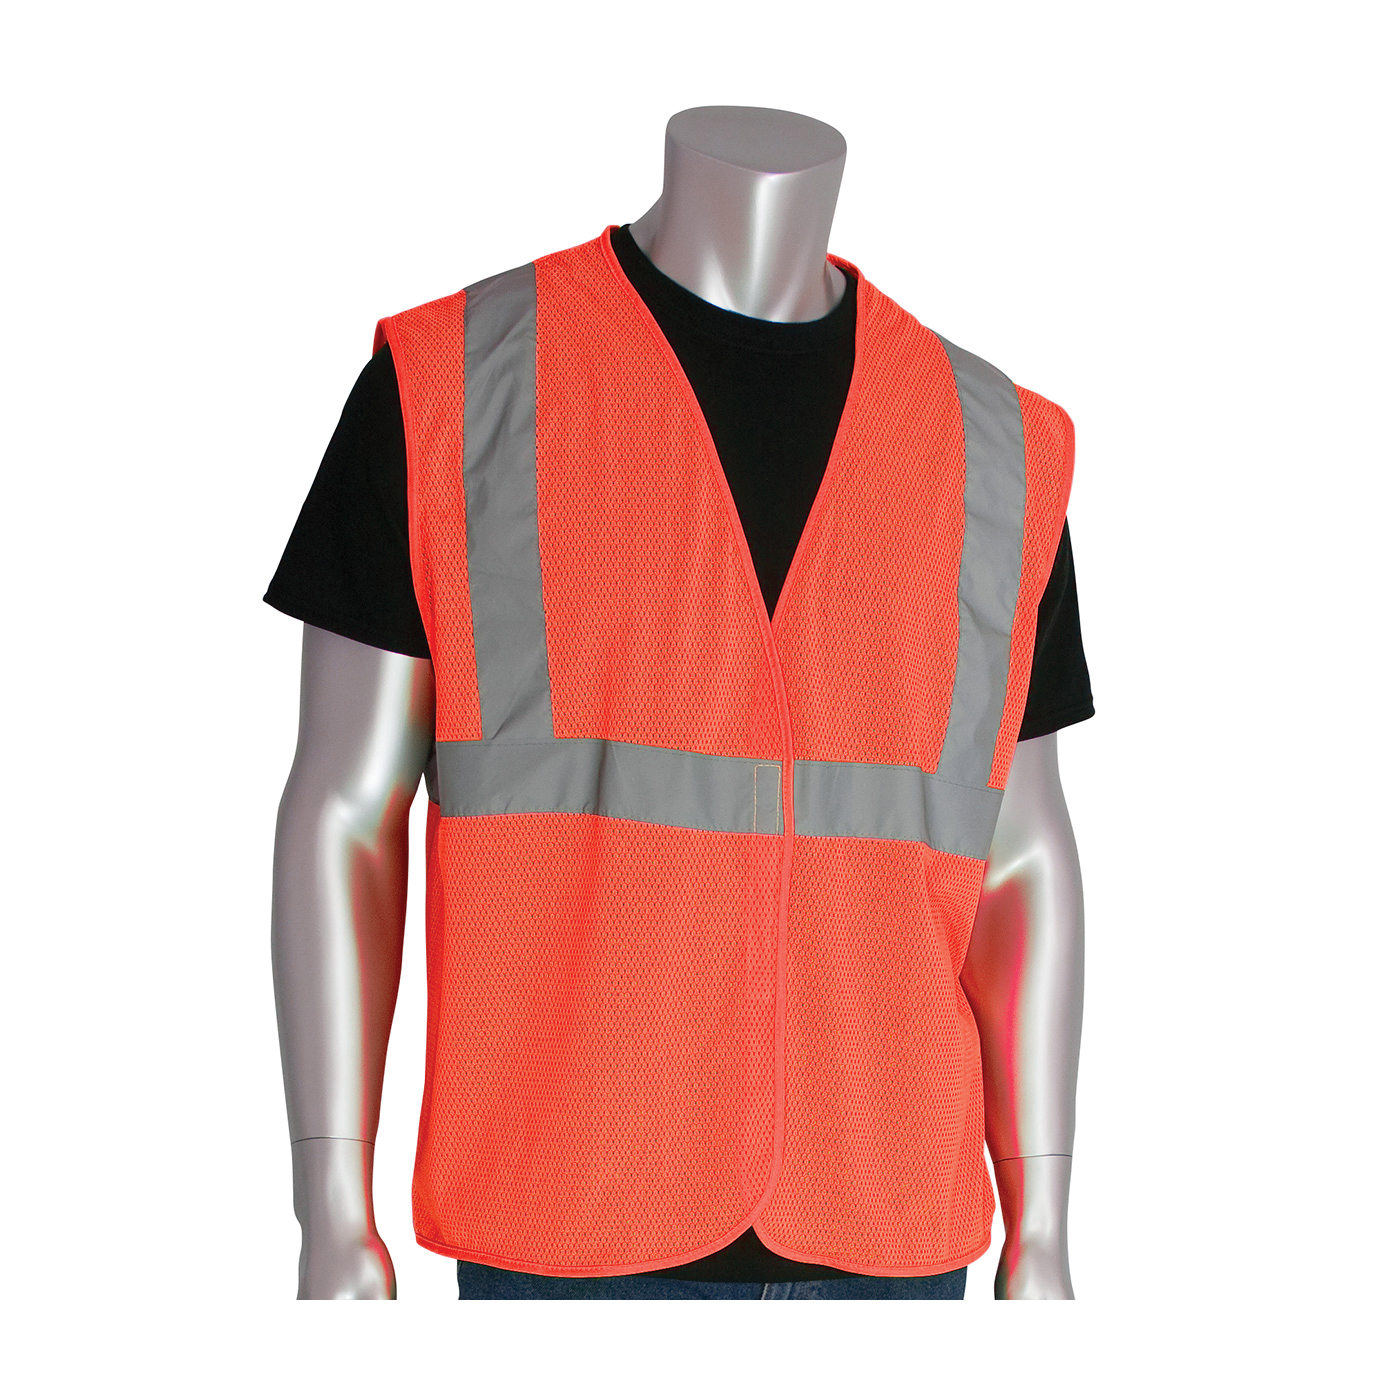 PIP® 302-MVGOR-S Safety Vest, S, Hi-Viz Orange, Polyester Mesh, Hook and Loop Closure, ANSI Class: Class 2, Specifications Met: ANSI 107 Type R